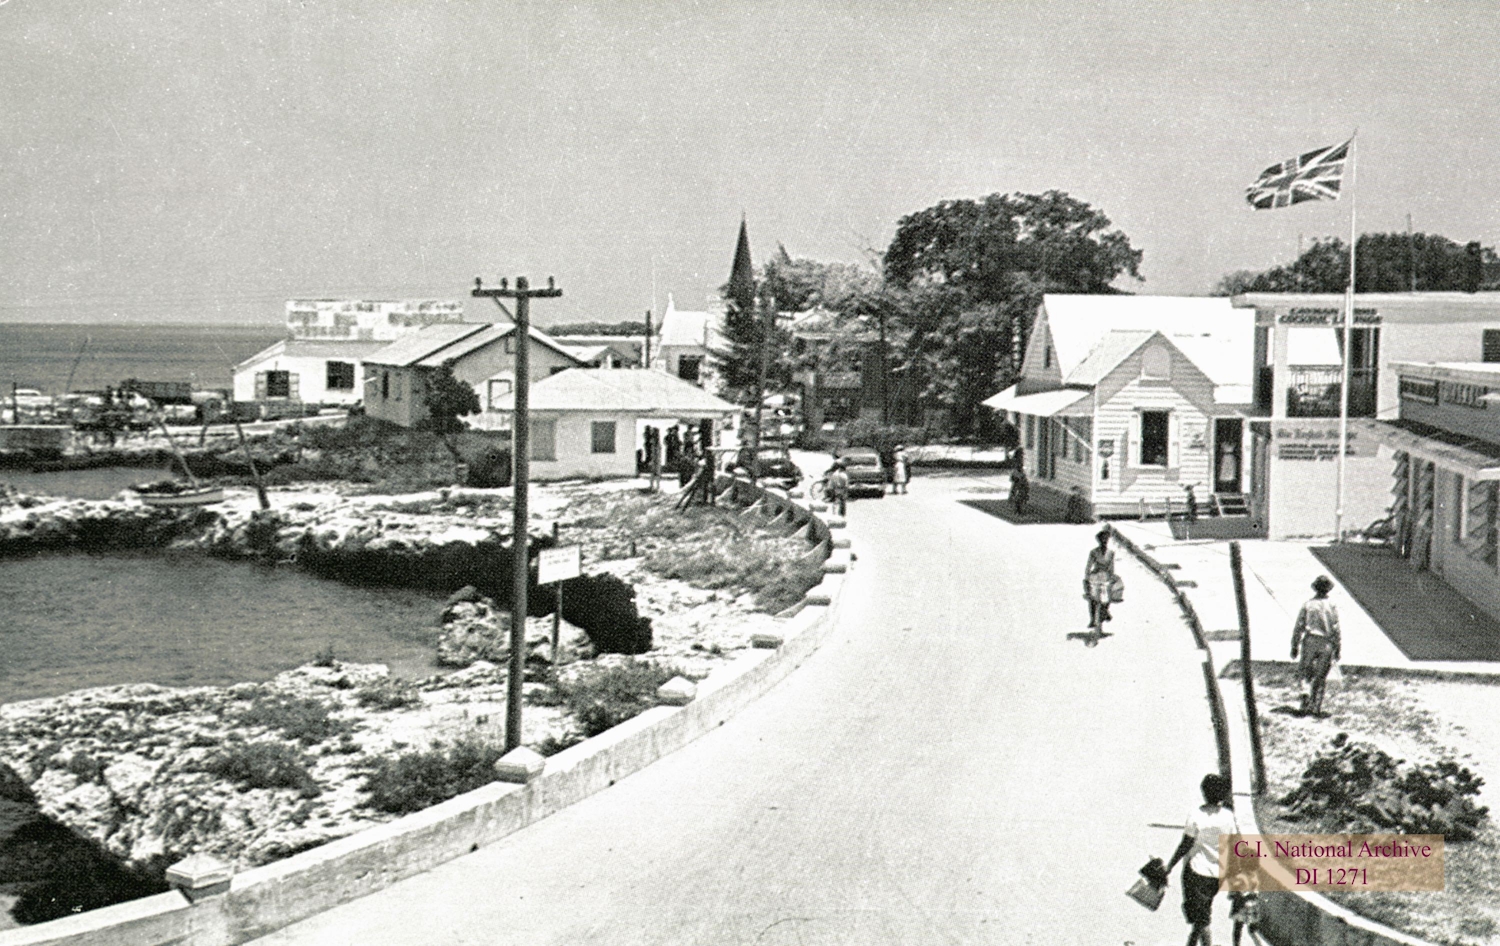 Archive image of curving main road in old George Town